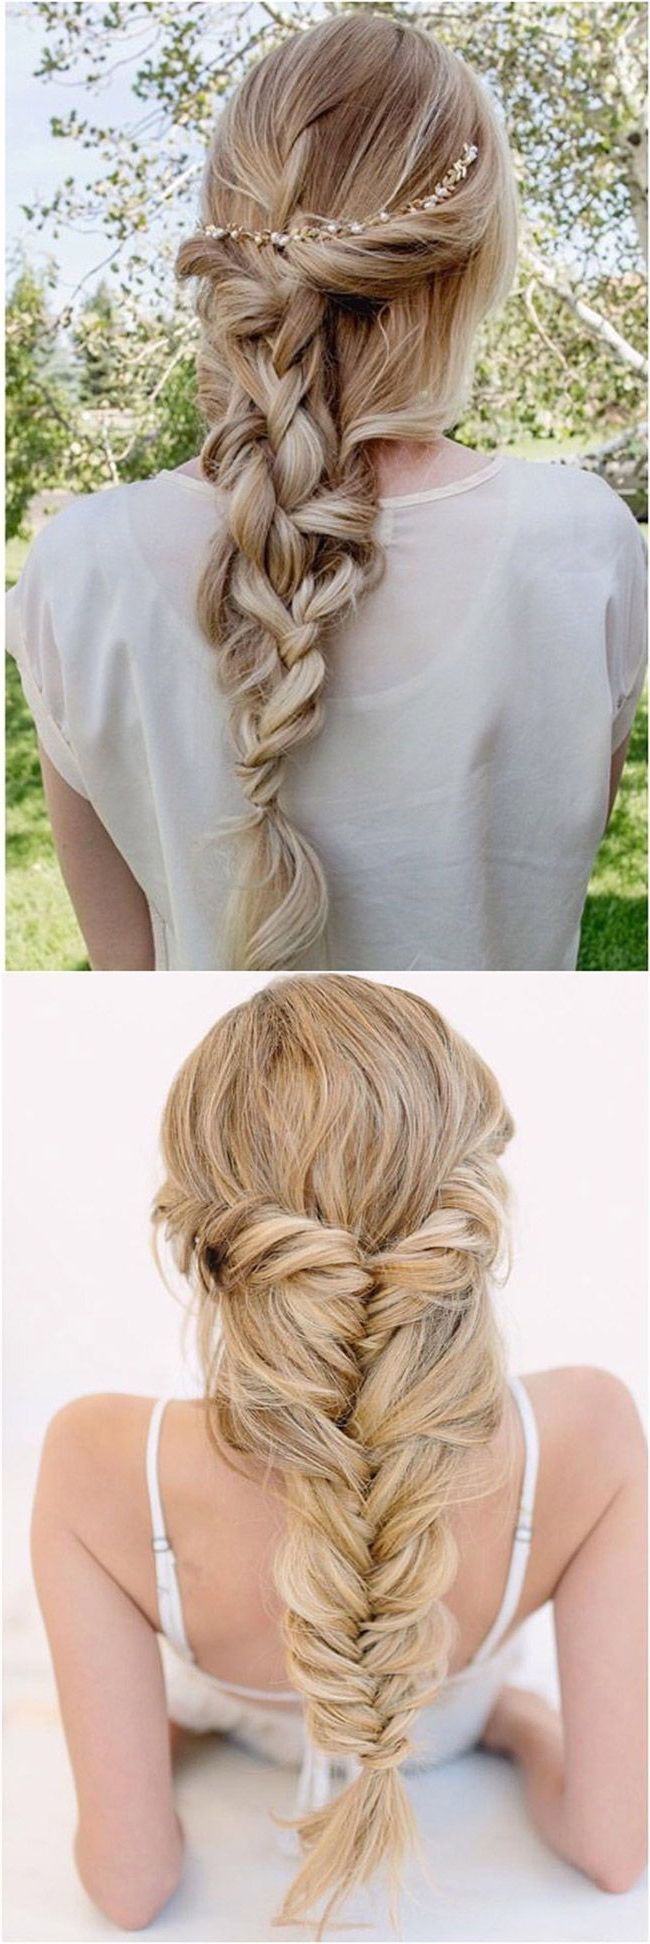 30+ Stunning Wedding Hair Styles From Within Fashionable Fishtail Updo Braid Hairstyles (View 20 of 20)